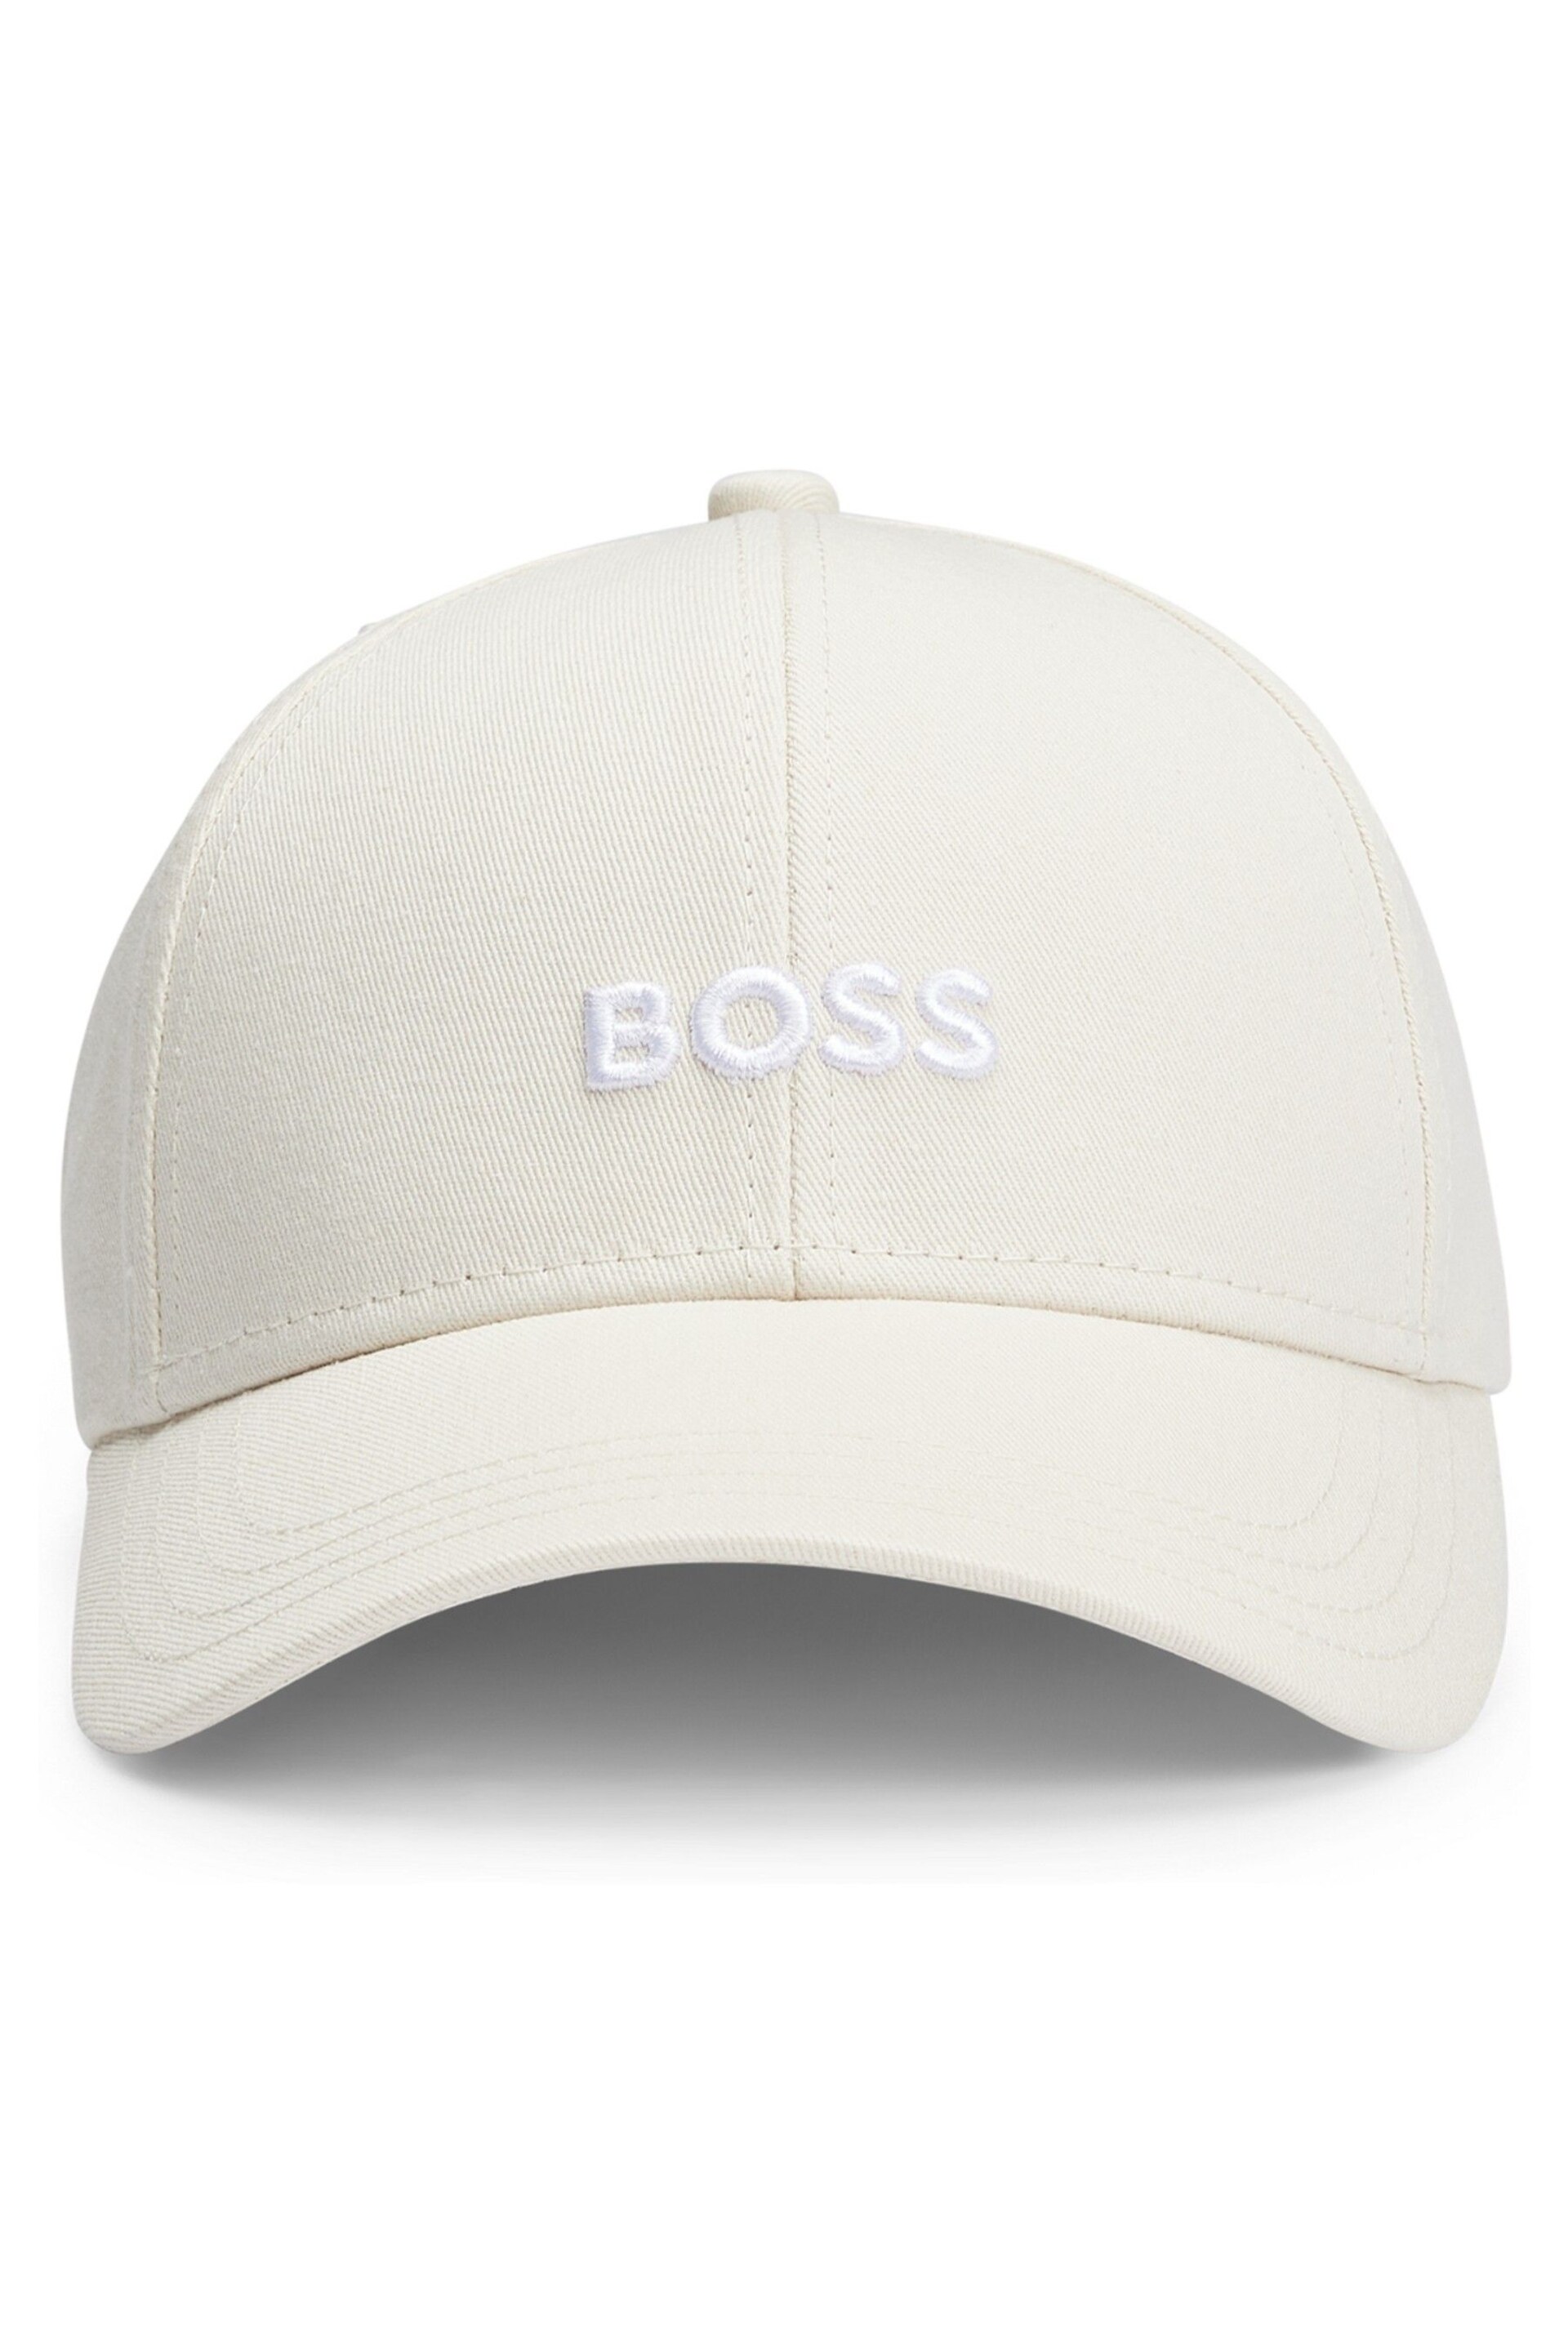 BOSS White Cotton-Twill Six-Panel Cap With Embroidered Logo - Image 2 of 5